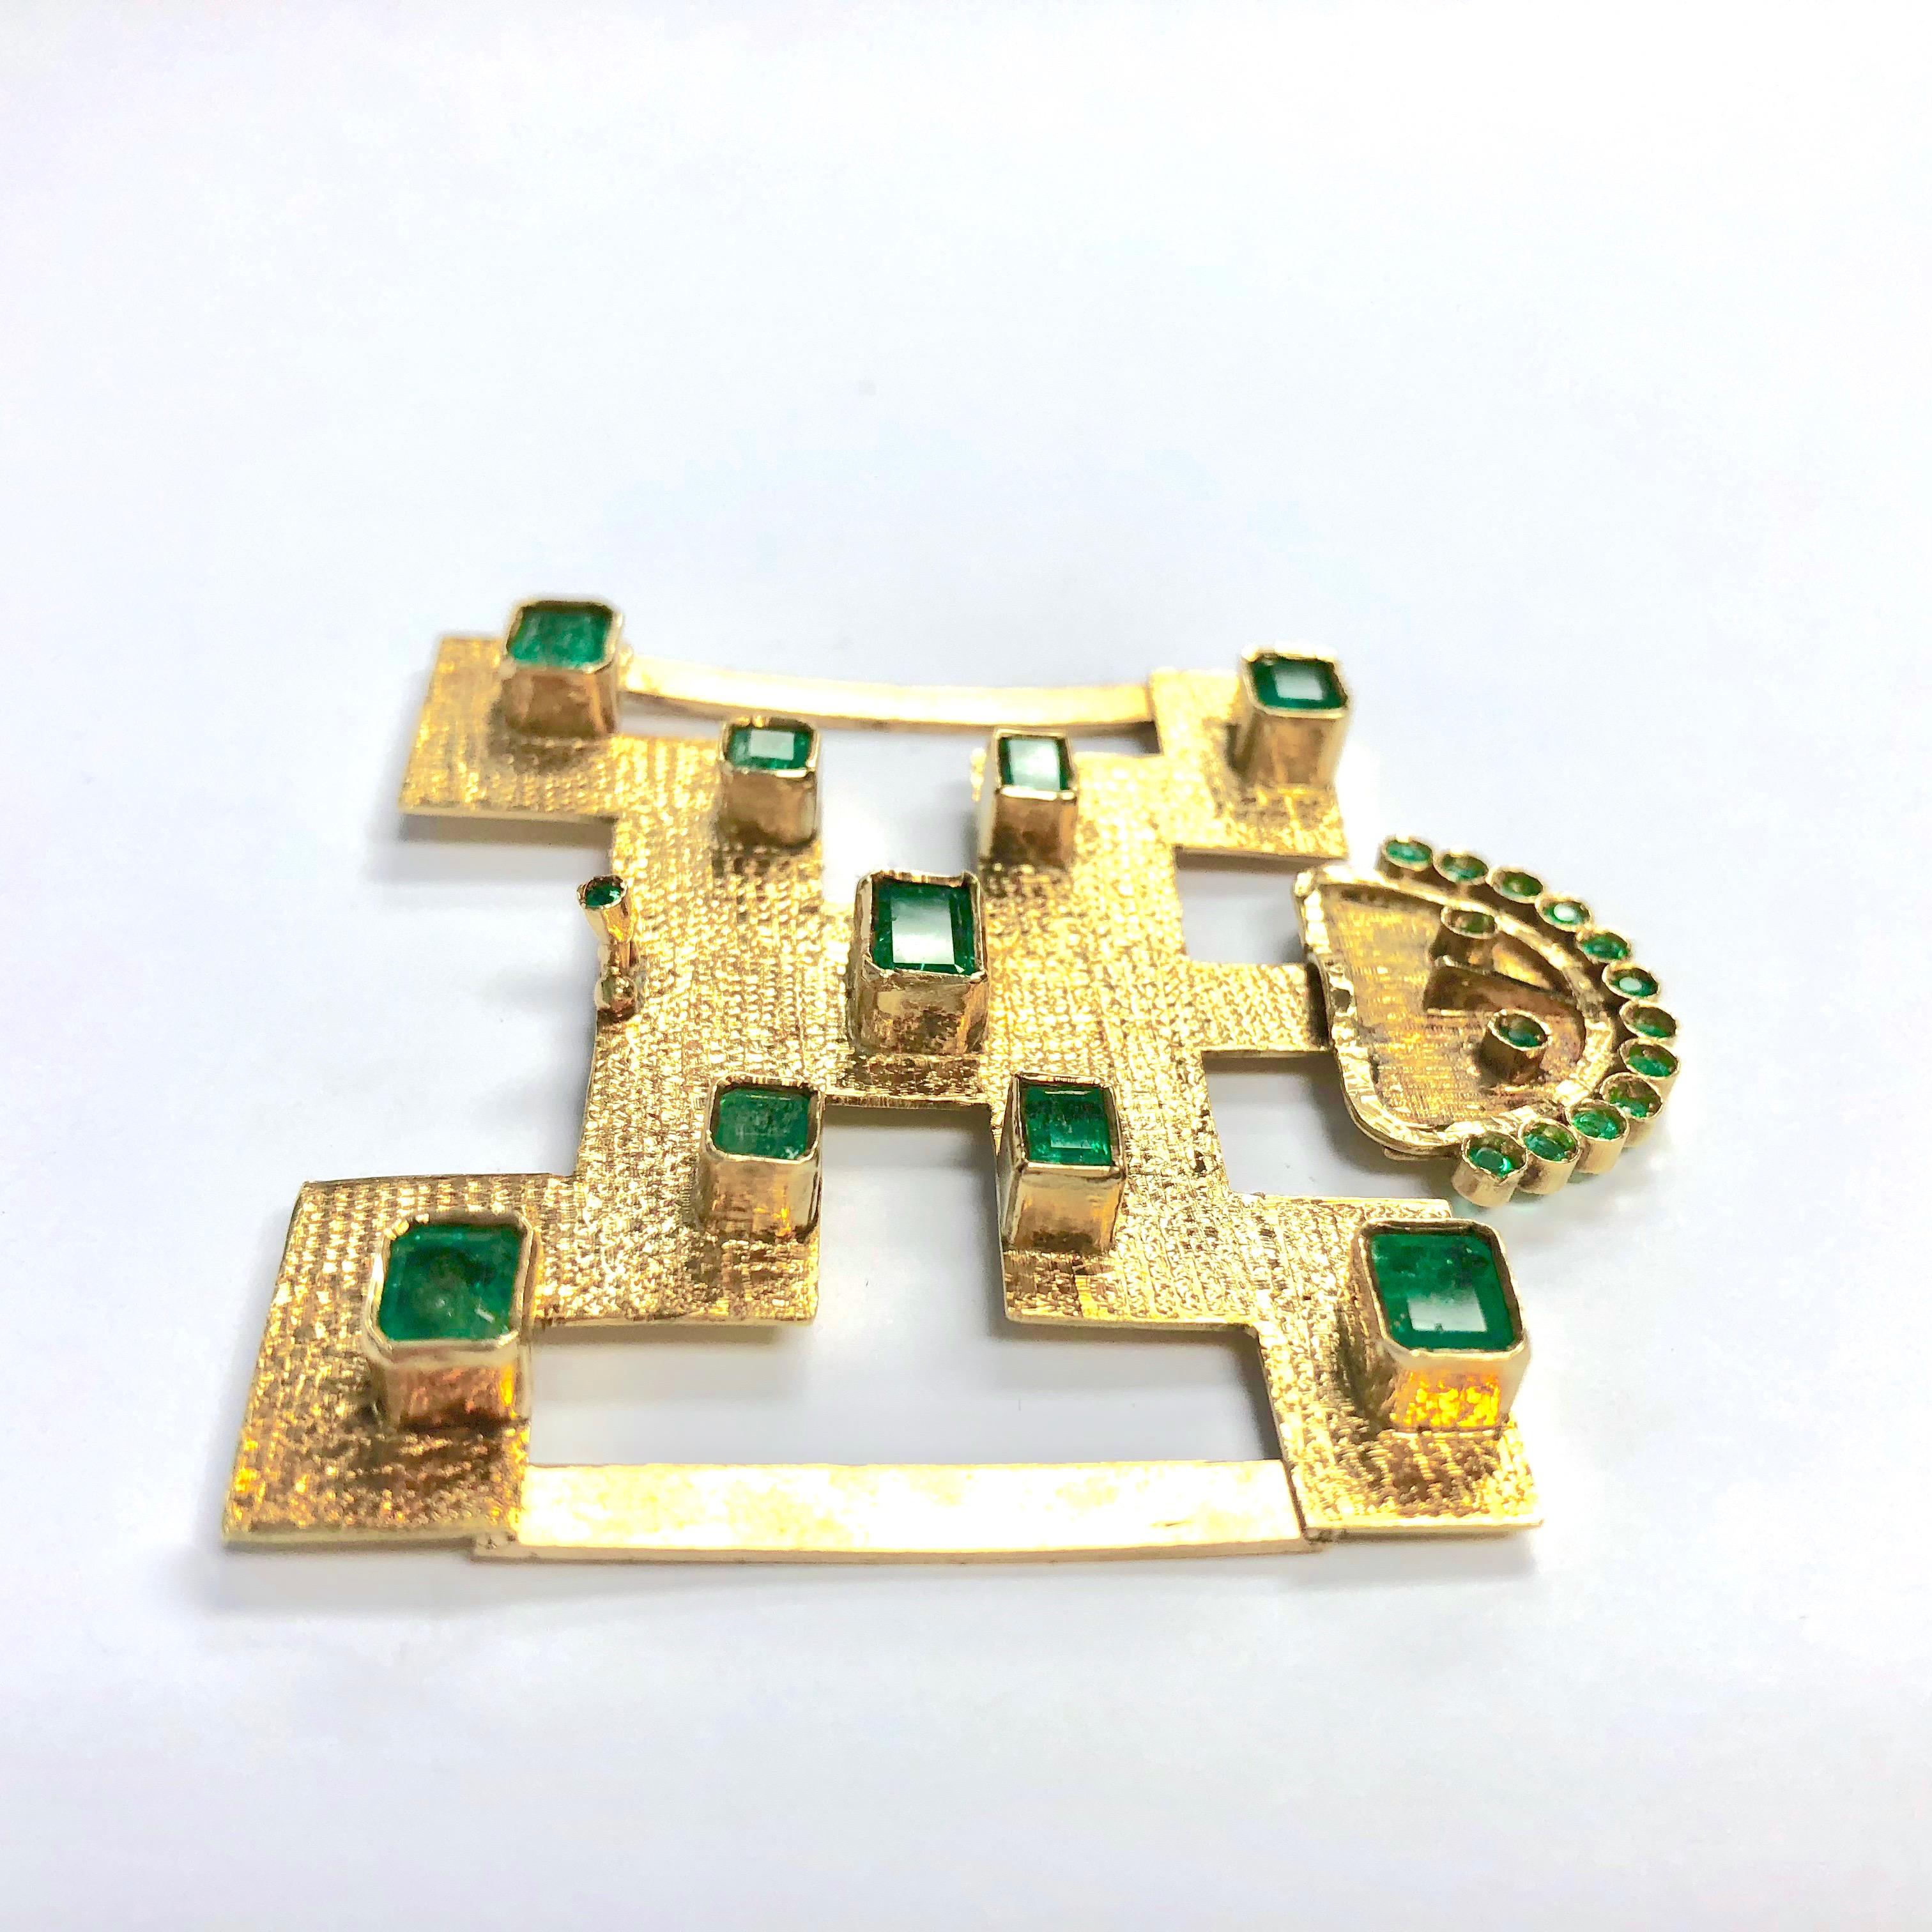 Amazing 18K yellow gold hand crafted belt buckle set with twenty-four bezel set round and rectangular step cut emeralds. Approximate total emerlad weight: 8.0 carats. (The Pijao or Pijaos formed a loose federation of Amerindians and were living in